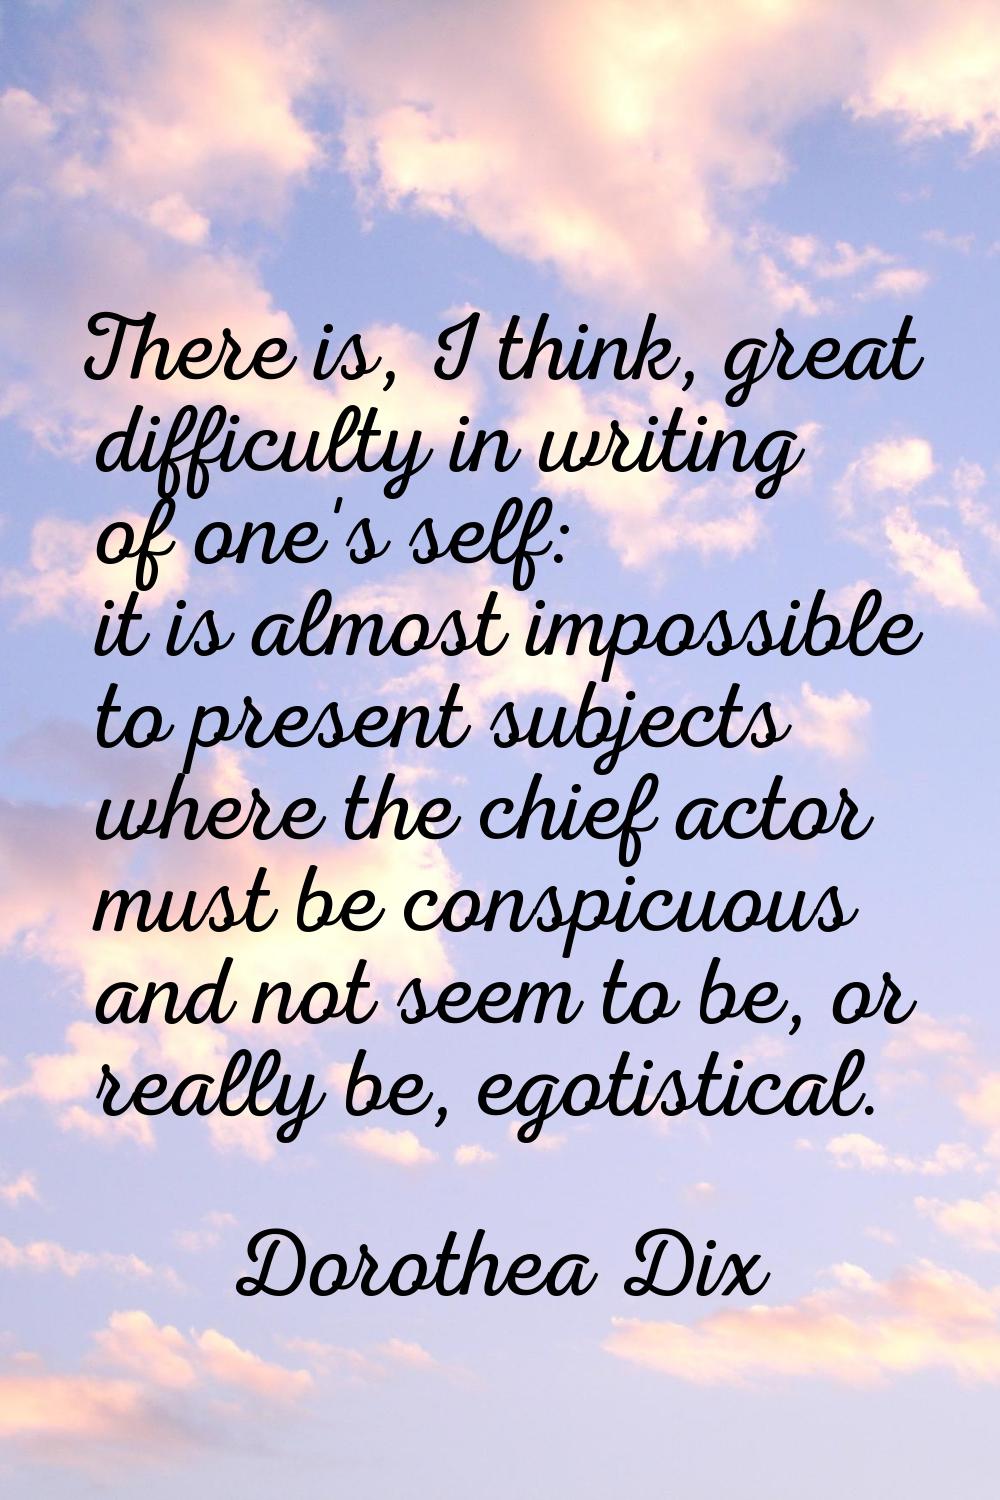 There is, I think, great difficulty in writing of one's self: it is almost impossible to present su